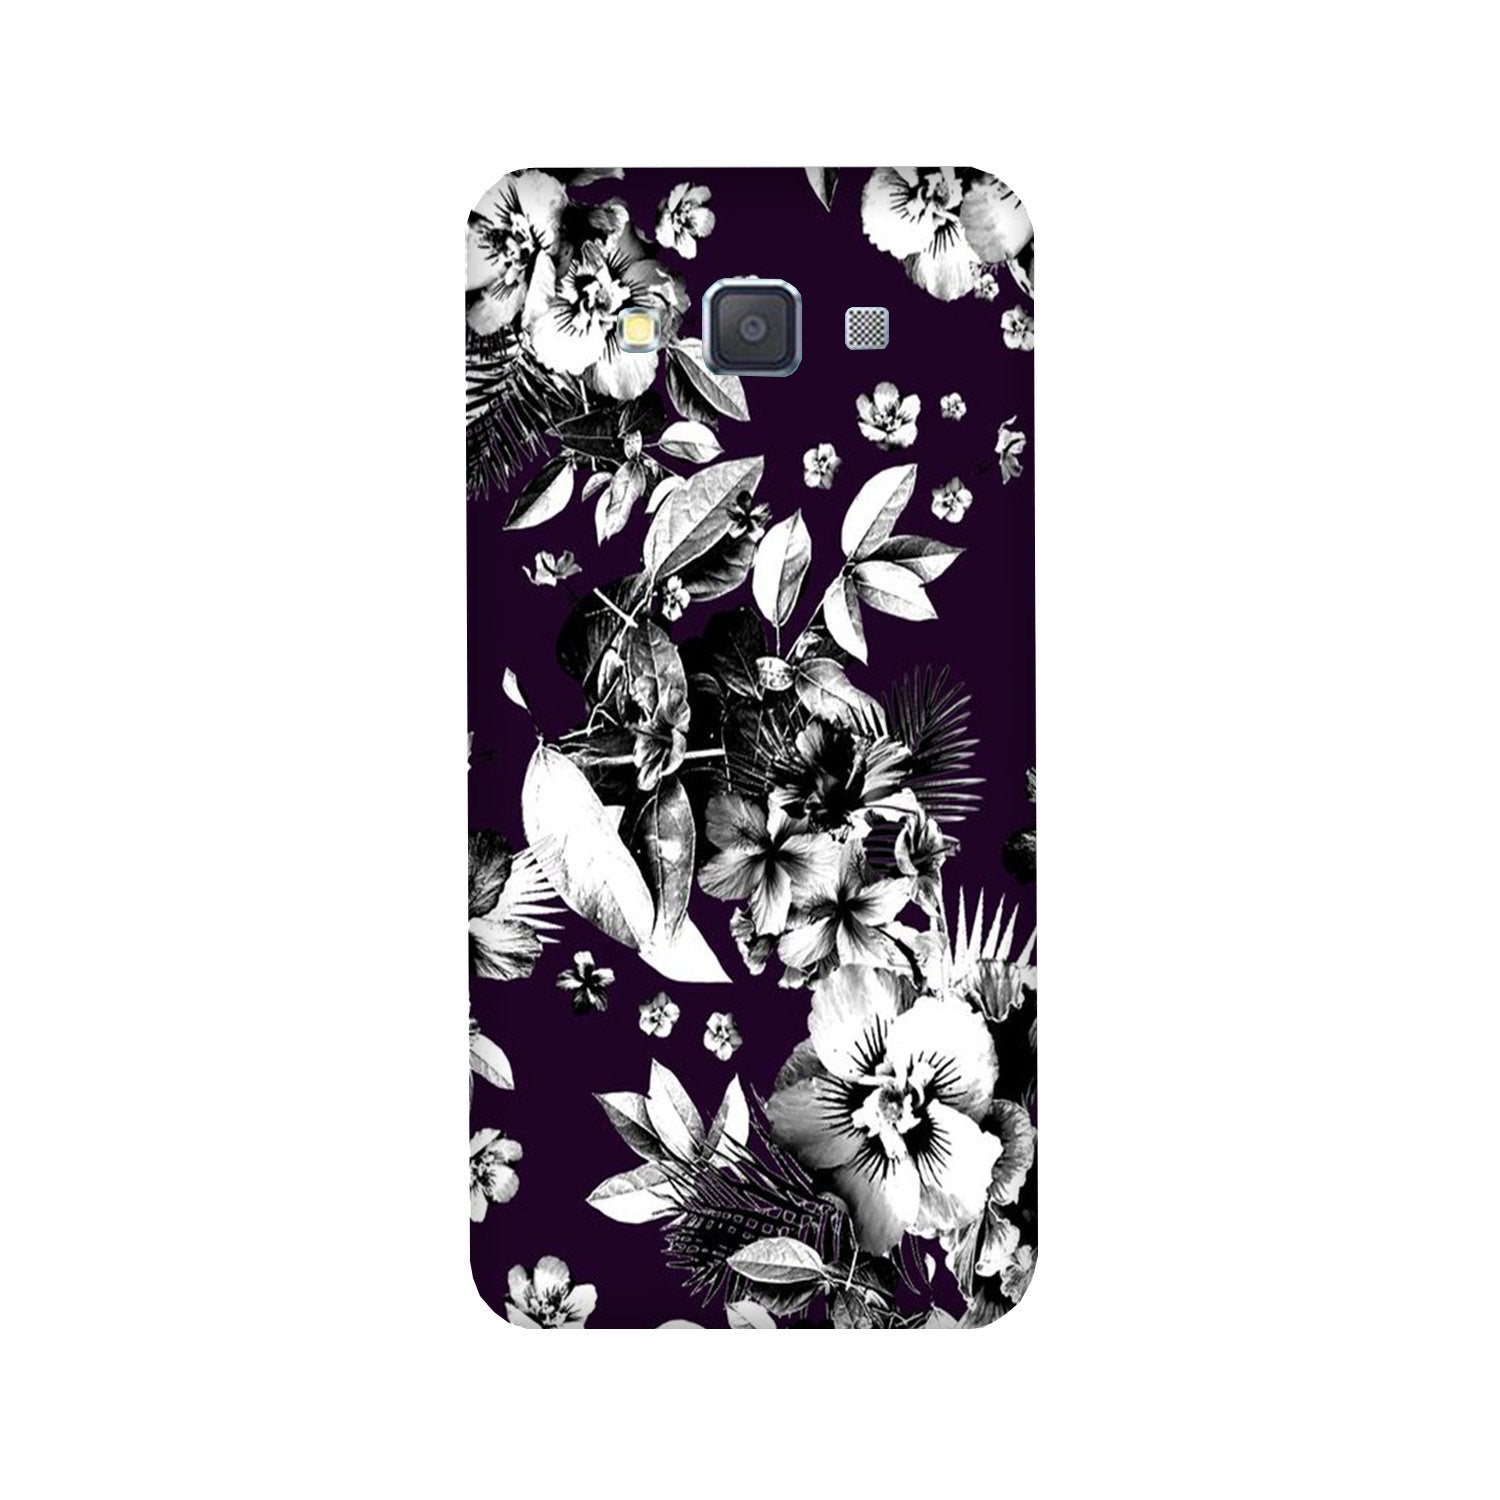 white flowers Case for Galaxy J5 (2016)